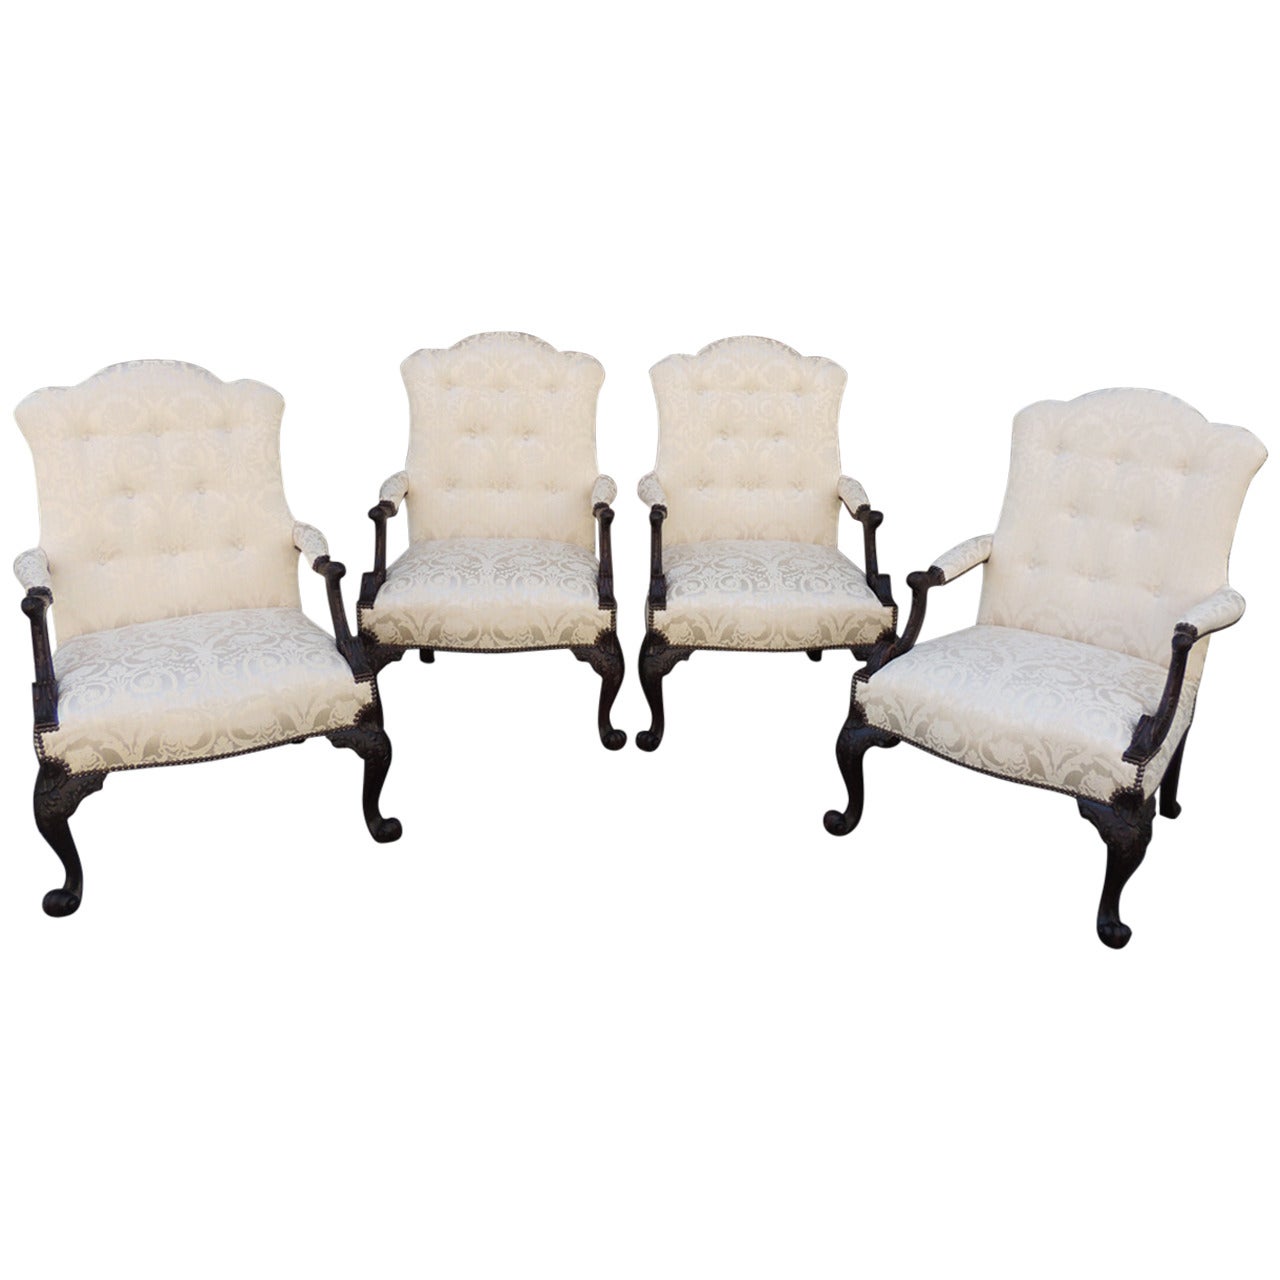 Set of Four Late 19th Century English Mahogany Library Chairs with White Silk